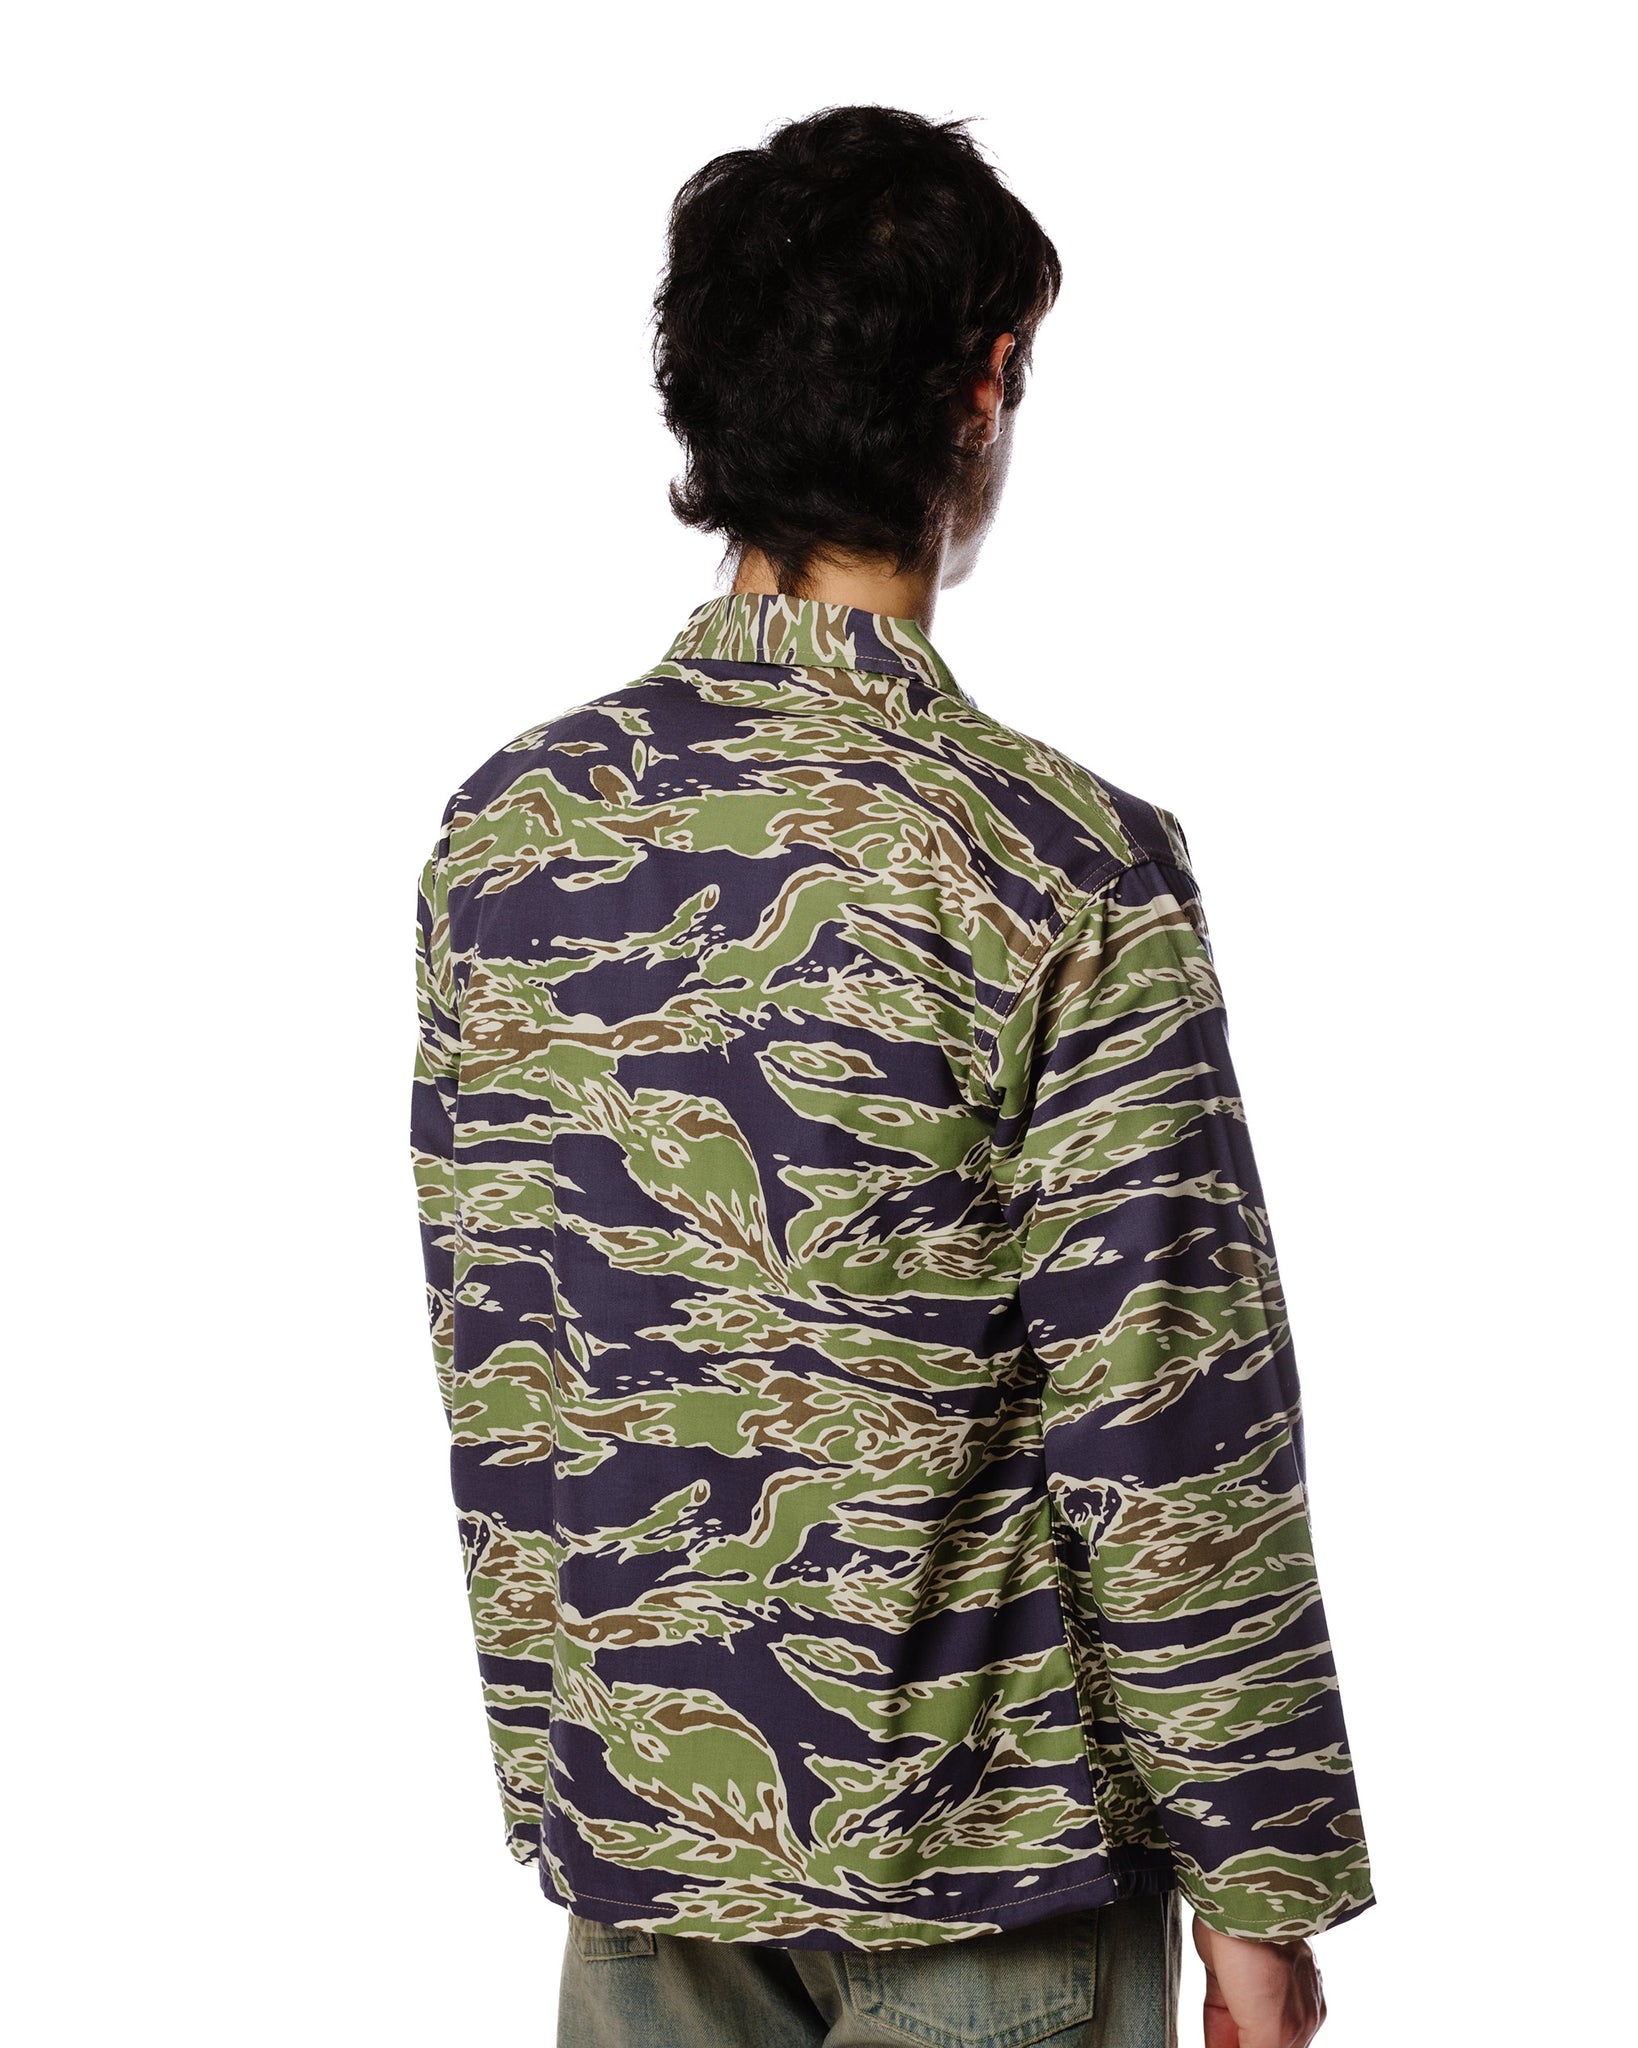 The Real McCoy's MS23002 Tiger Camouflage Shirt / Late War Green Model Back